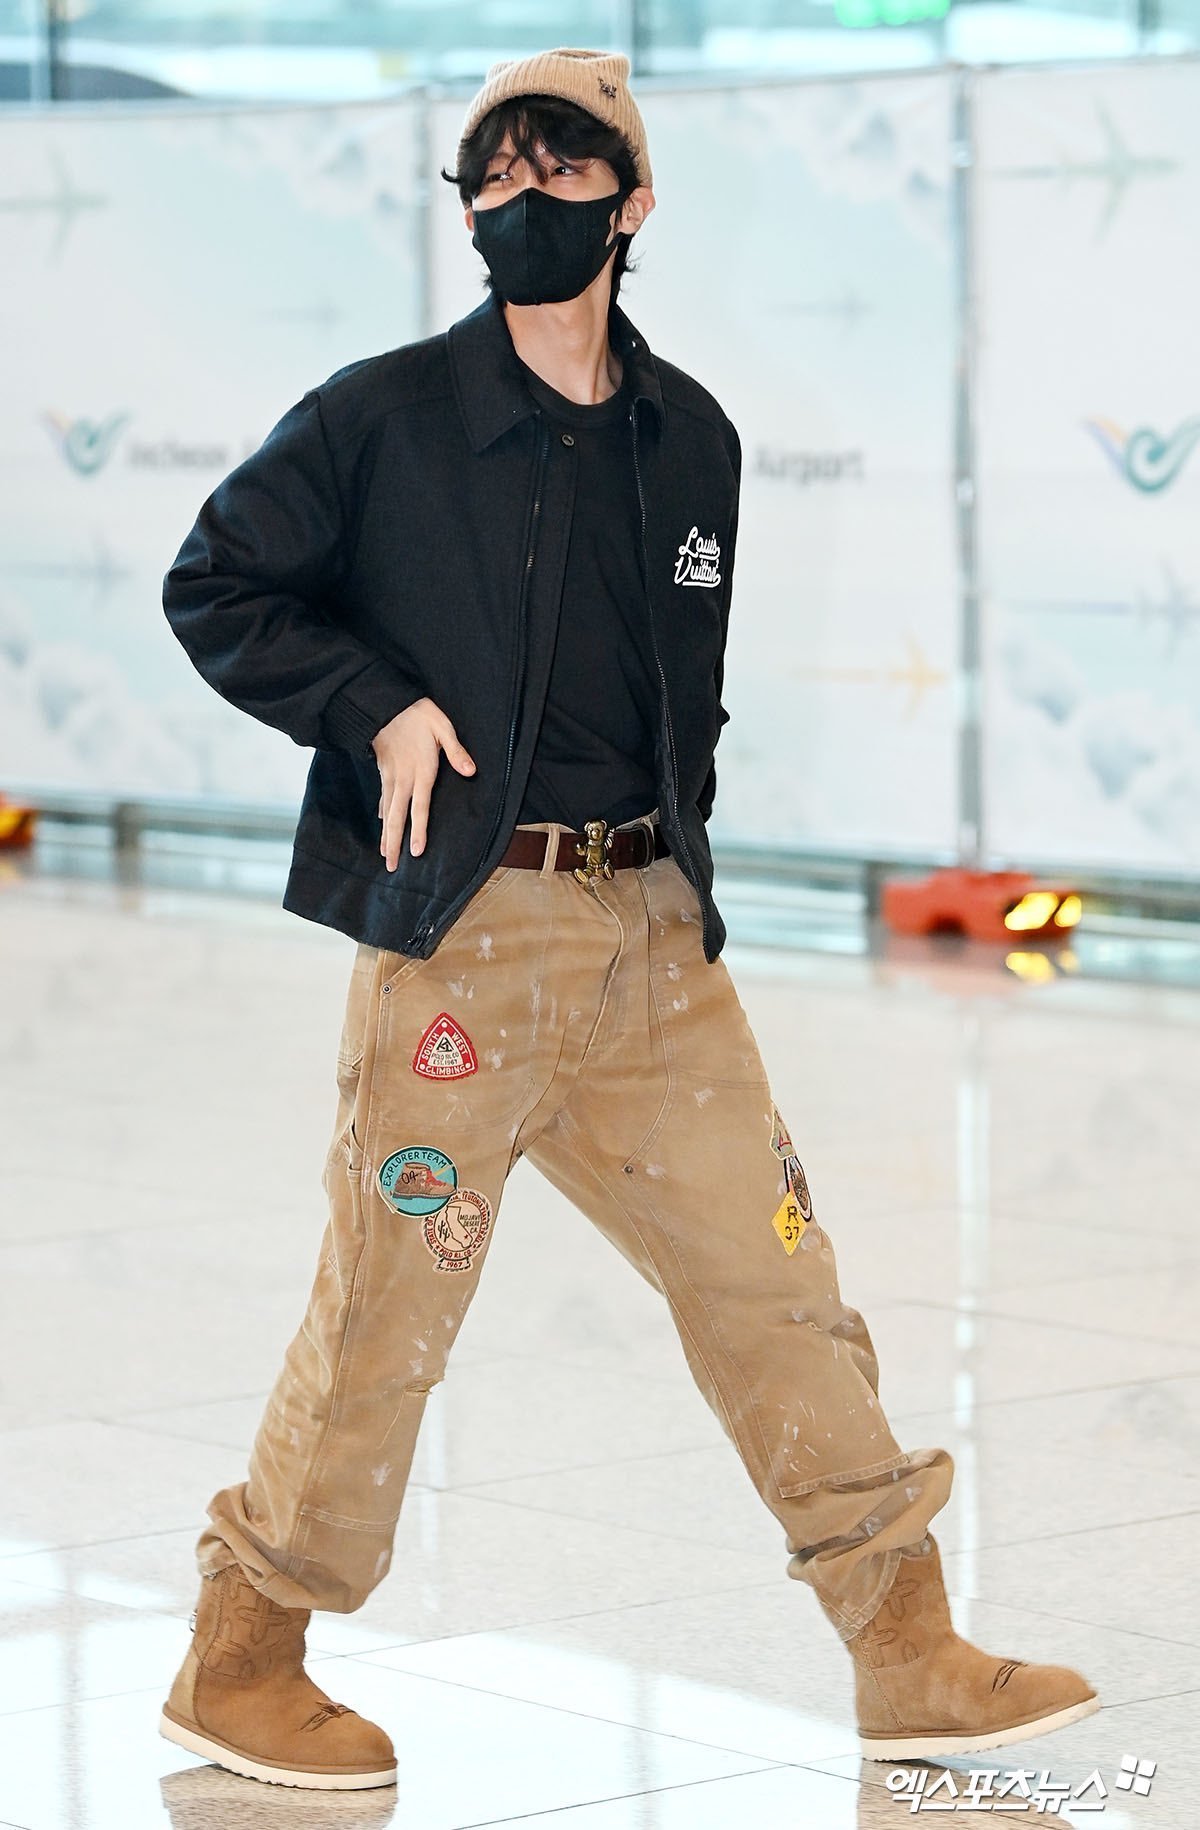 jayvee on X: wowlouis vuitton military style! is it a coincidence?   / X